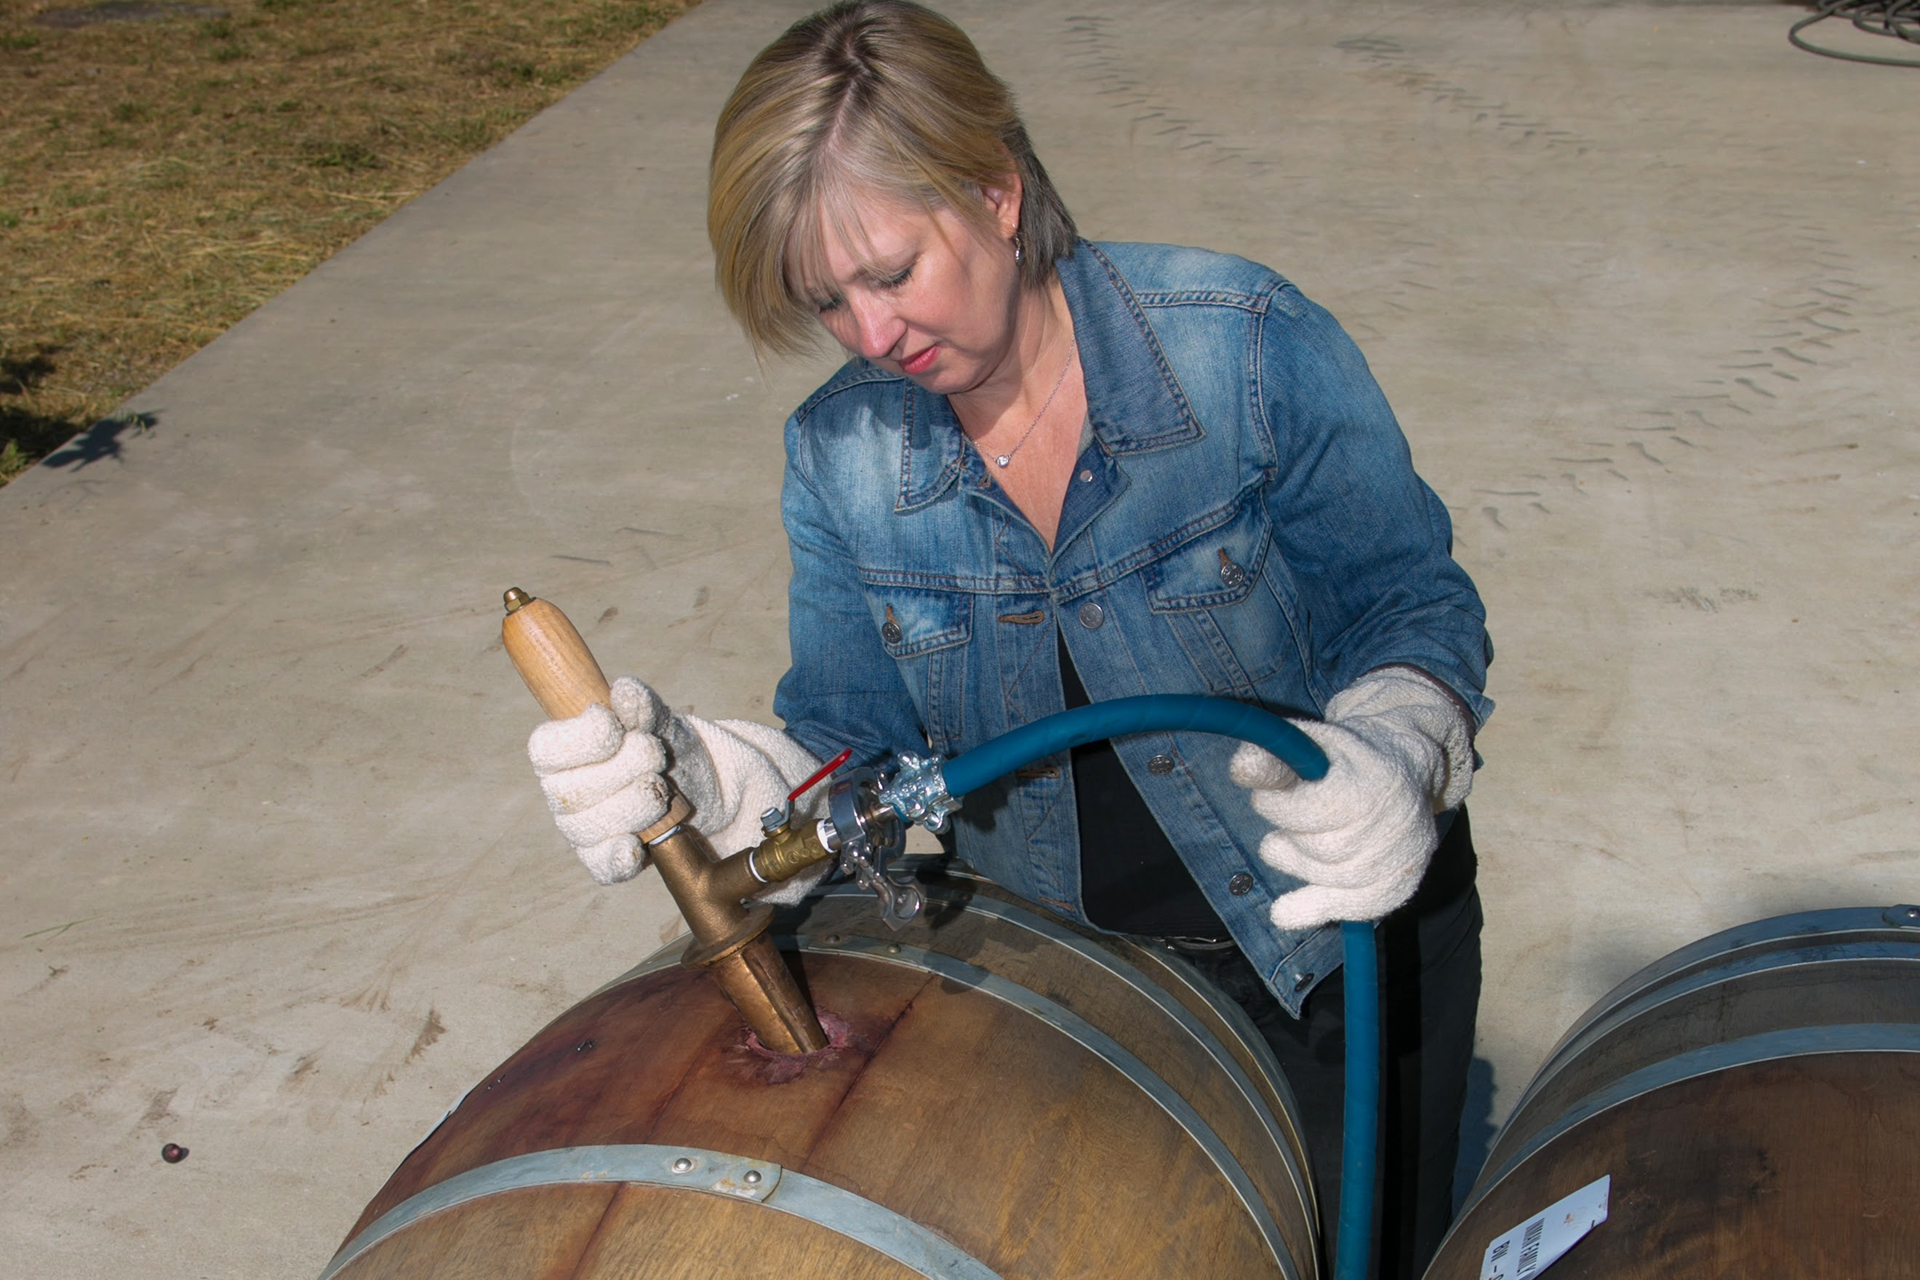 Kathleen Inman, owner and winemaker, taking a sample of wine from a barrel